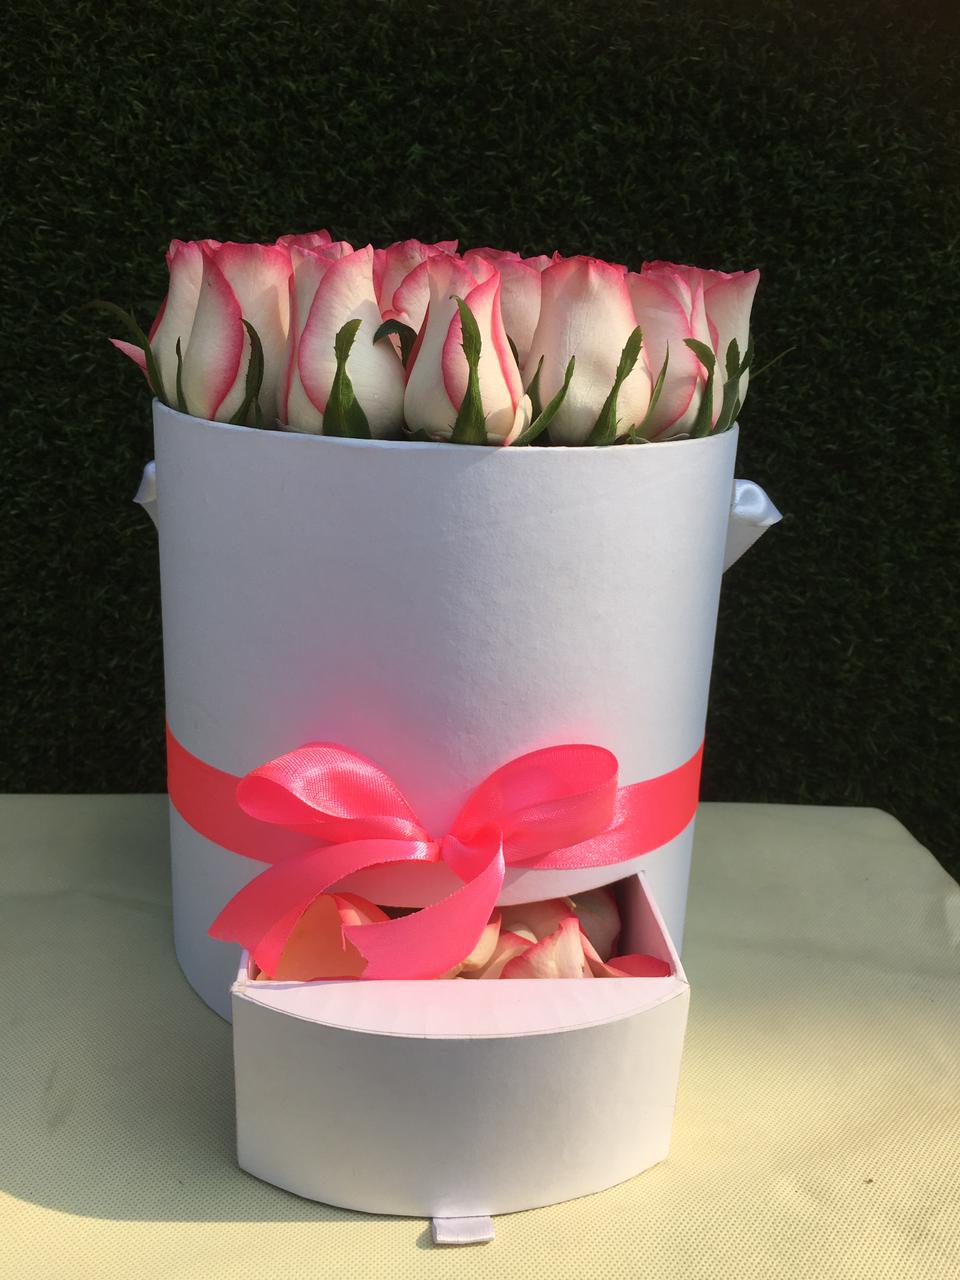 White Rounds Delivery,
Sector 59, Noida,
Elegant Gifting,
Round Gift Packages,
Sophisticated Presents,
Noida Gift Delivery,
Premium Gift Selection,
Special Occasion Gifting,
Refined Gifts,
Thoughtful Surprises